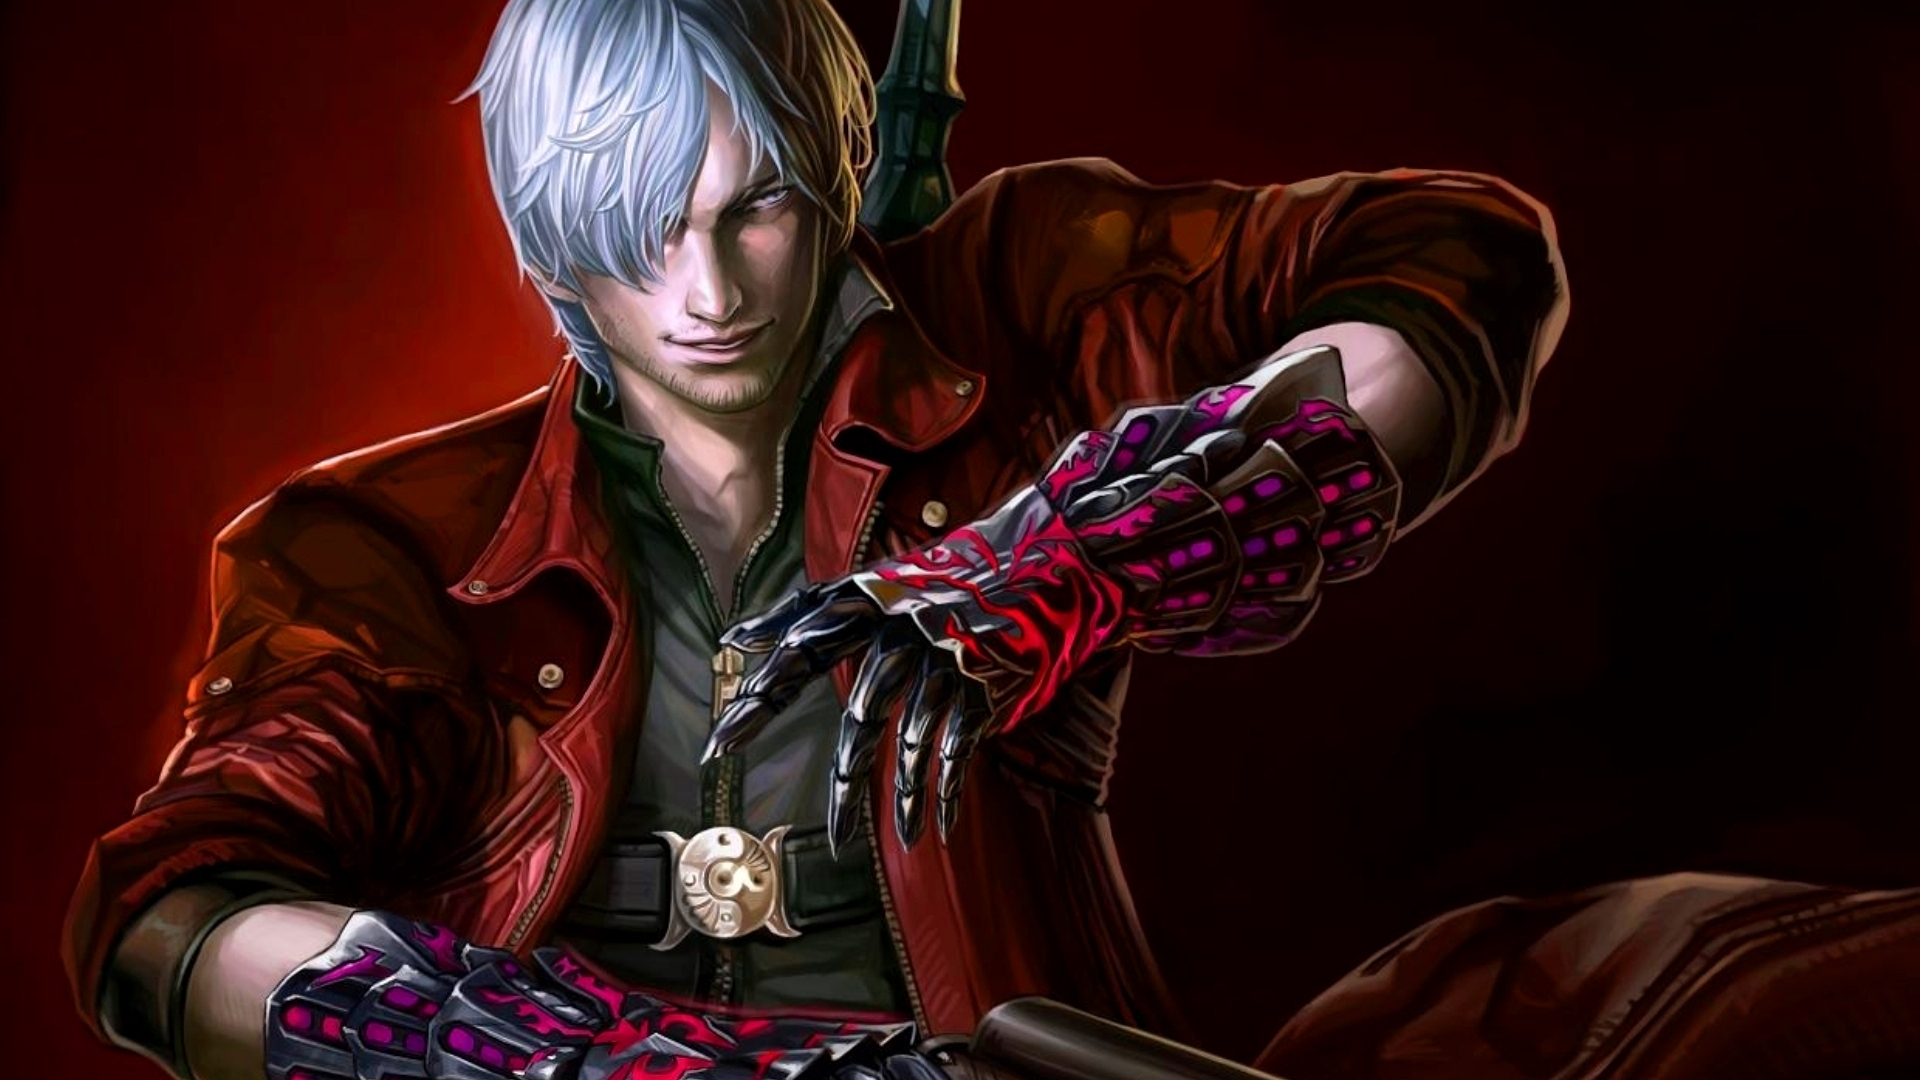  wallpapers of Devil May Cry 4 You are downloading Devil May Cry 4 1920x1080